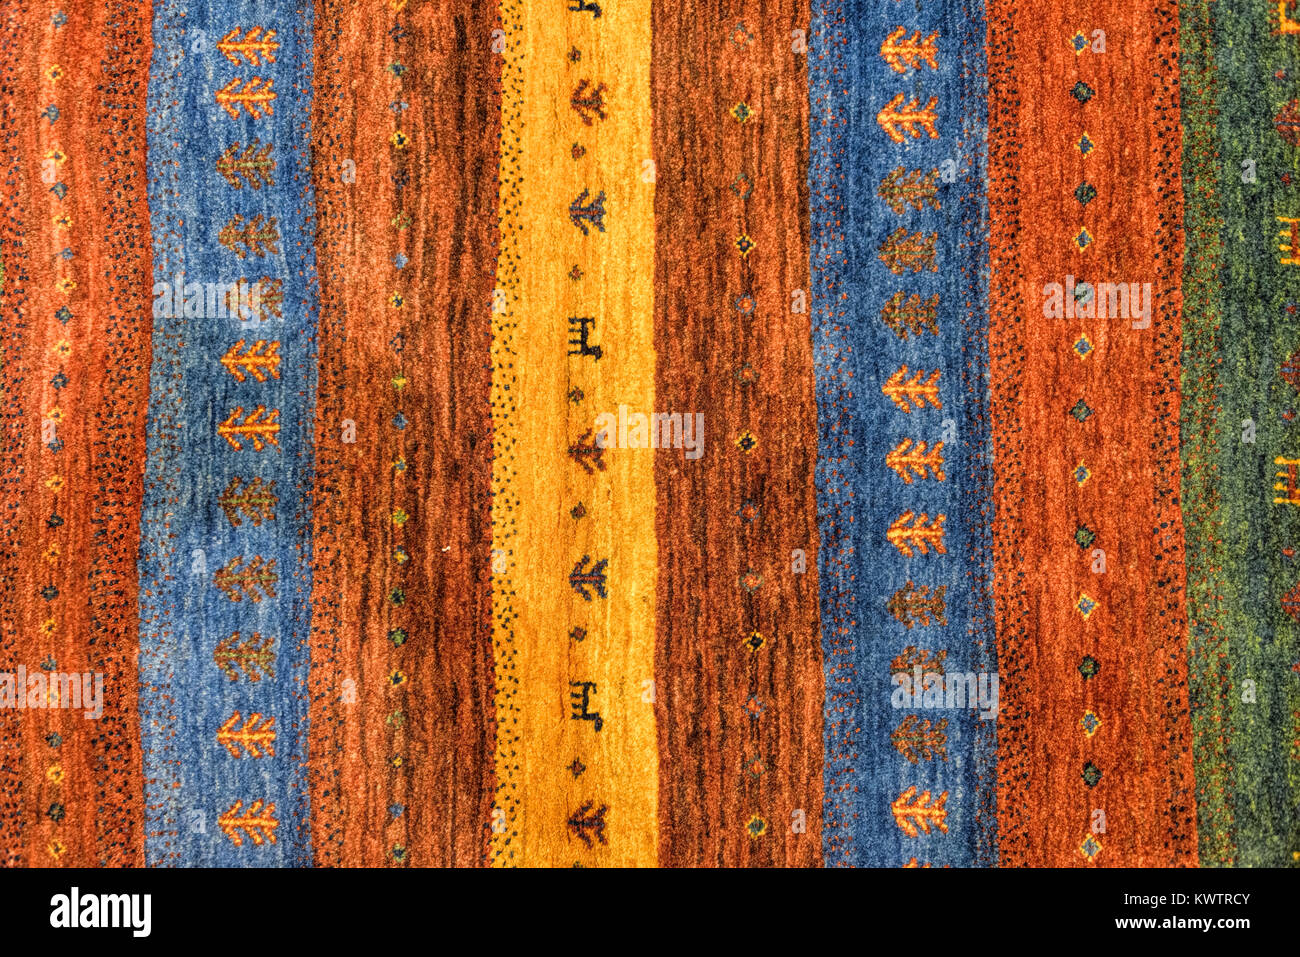 Pieces of colorful patterned carpets as backgrounds Stock Photo